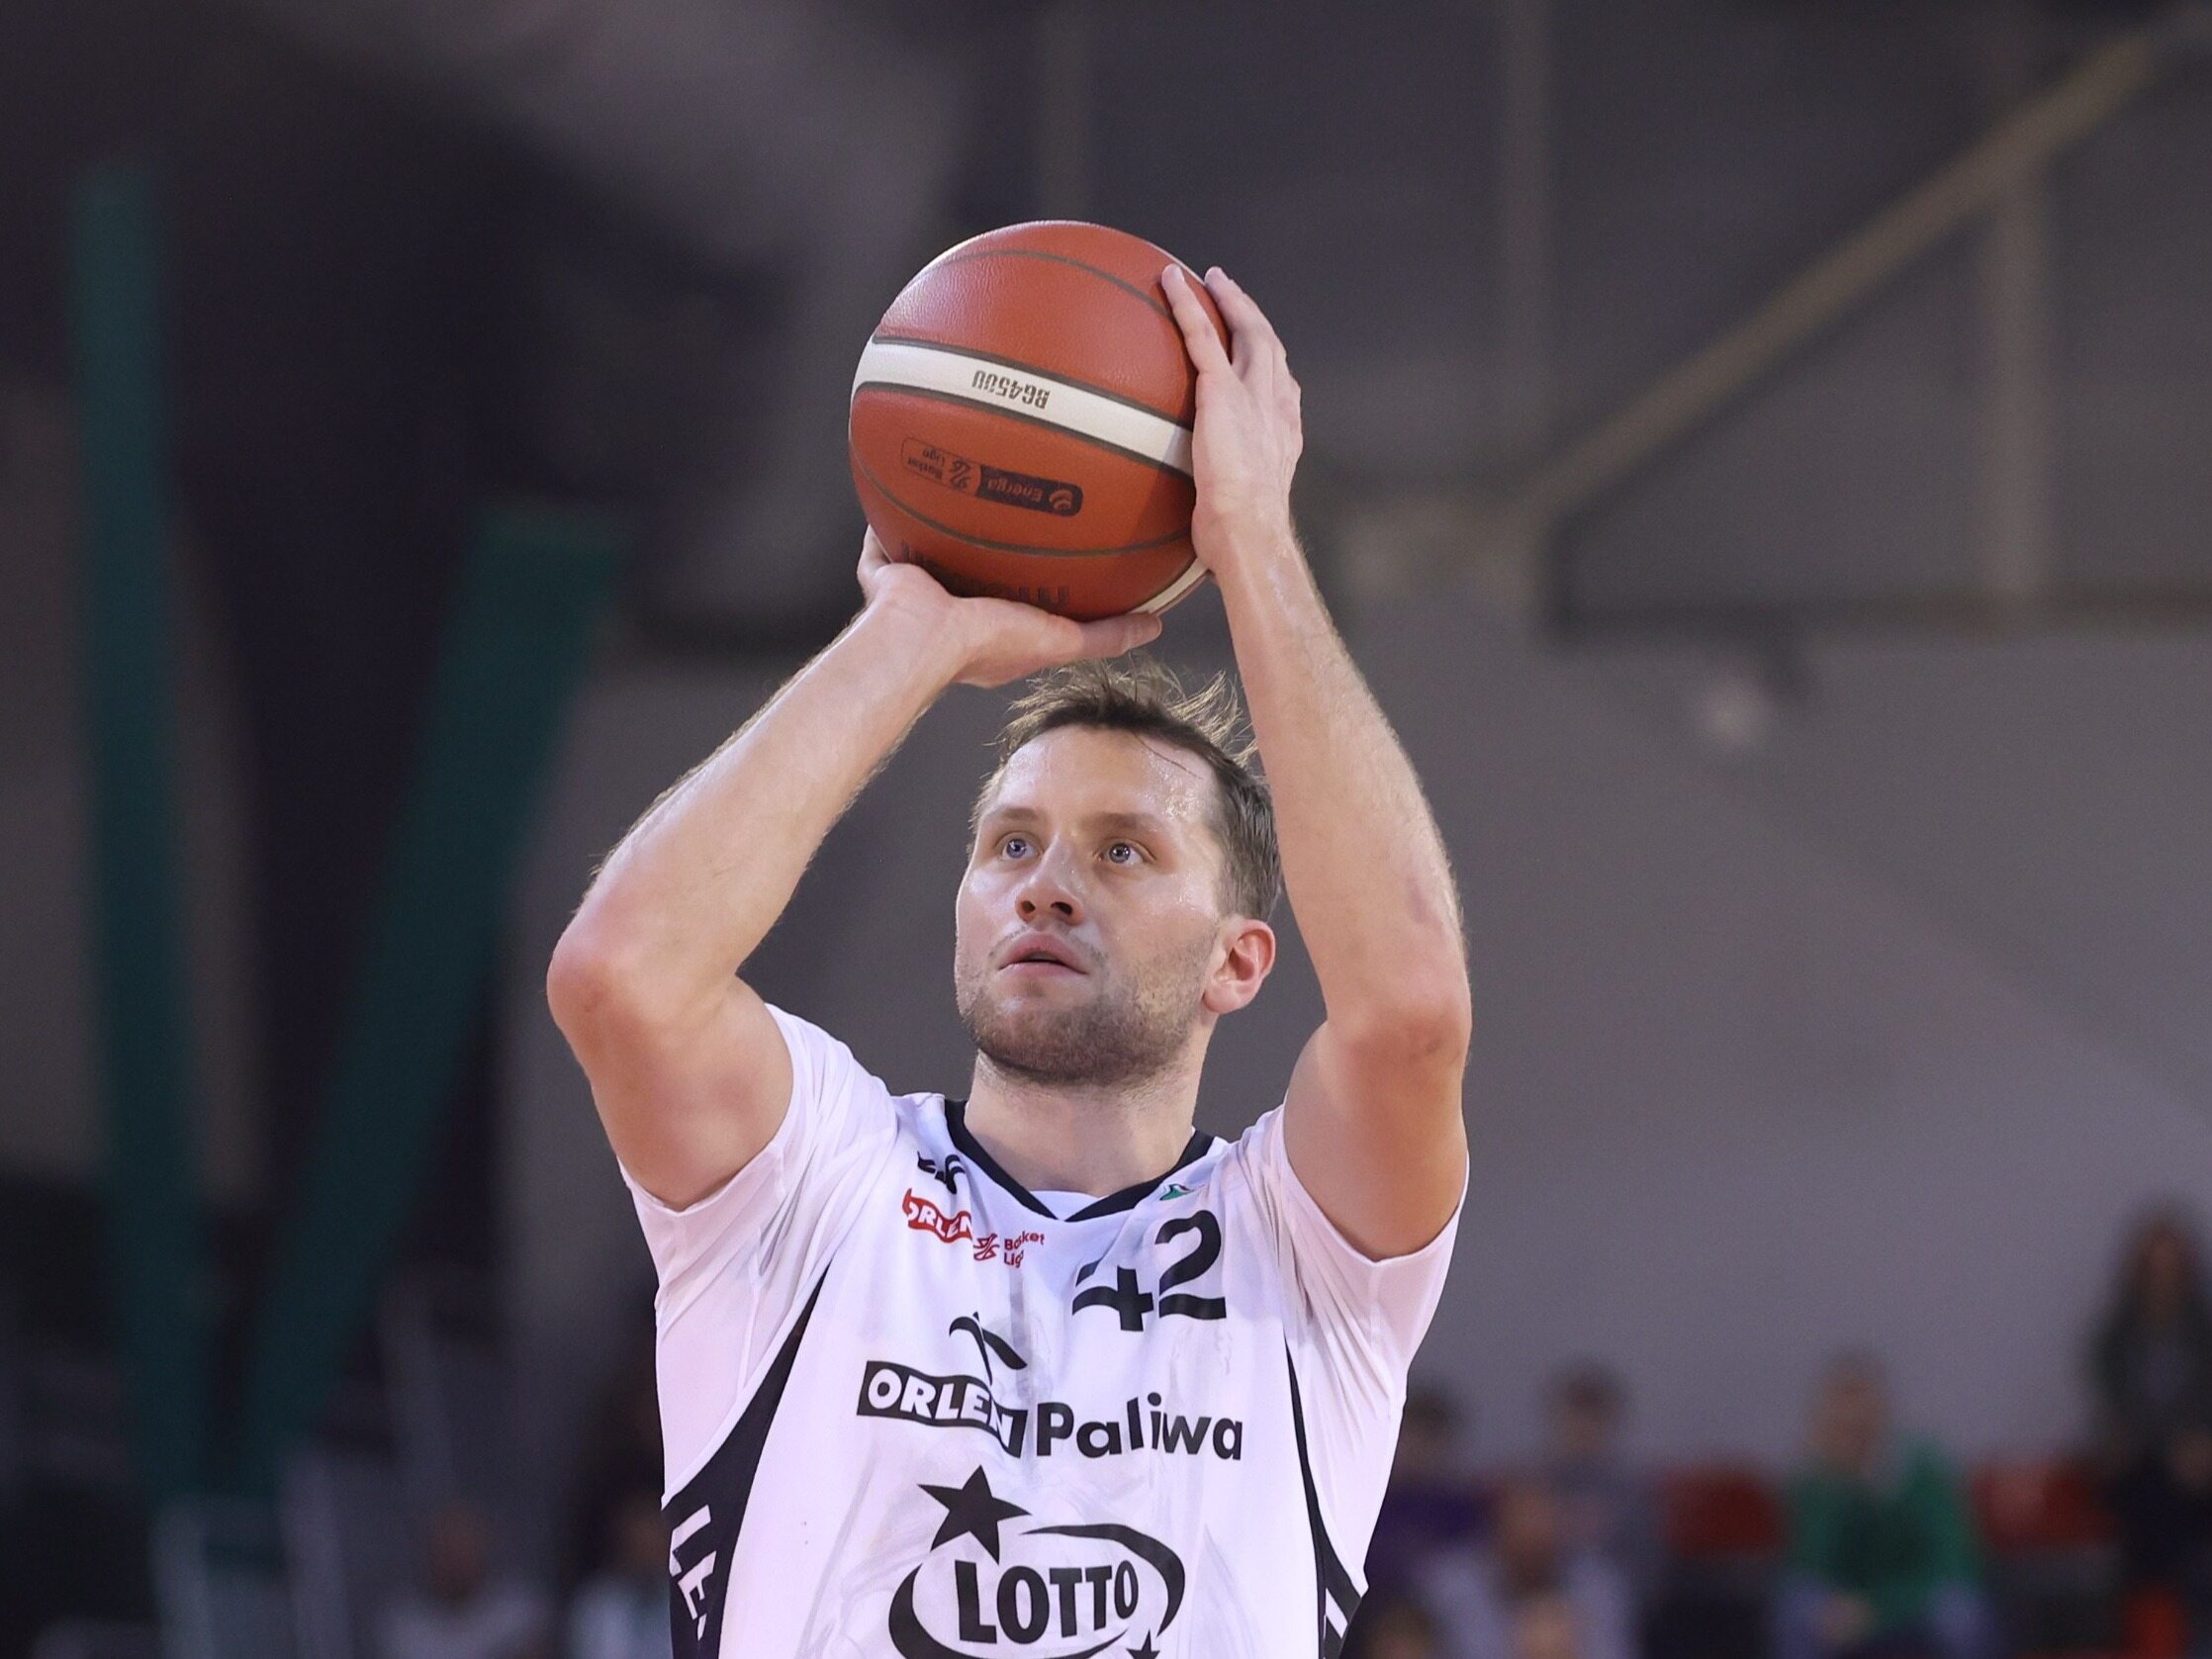 Polish basketball has been waiting 18 years for a similar feat.  A phenomenal performance by Marcel Ponitka